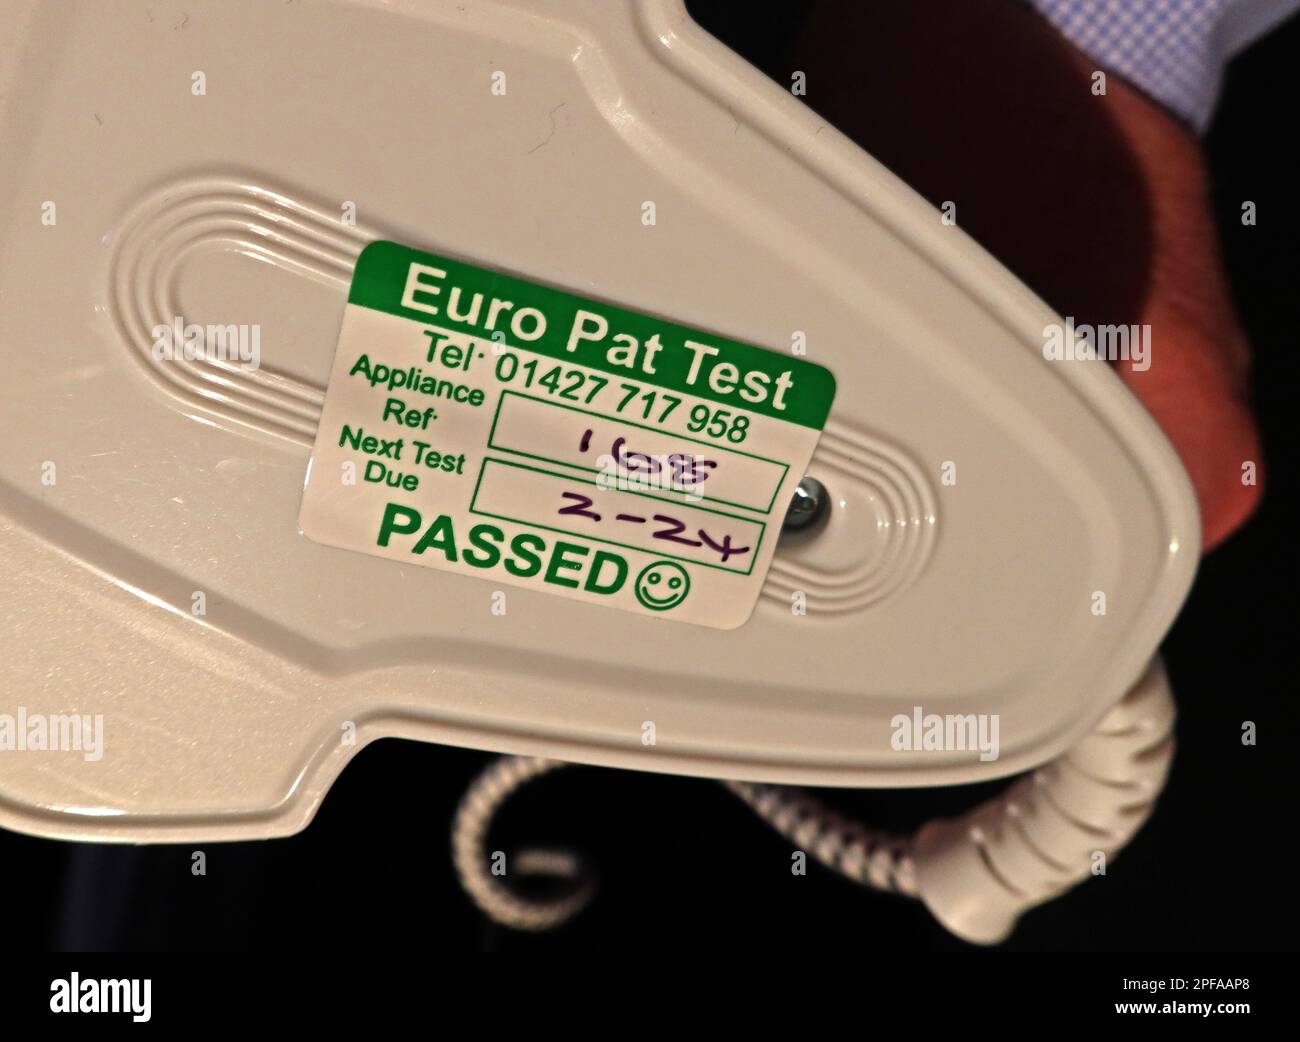 Euro Pat Test label, Portable Appliance Testing - passed , Appliance Ref and next test due - Passed green label Stock Photo